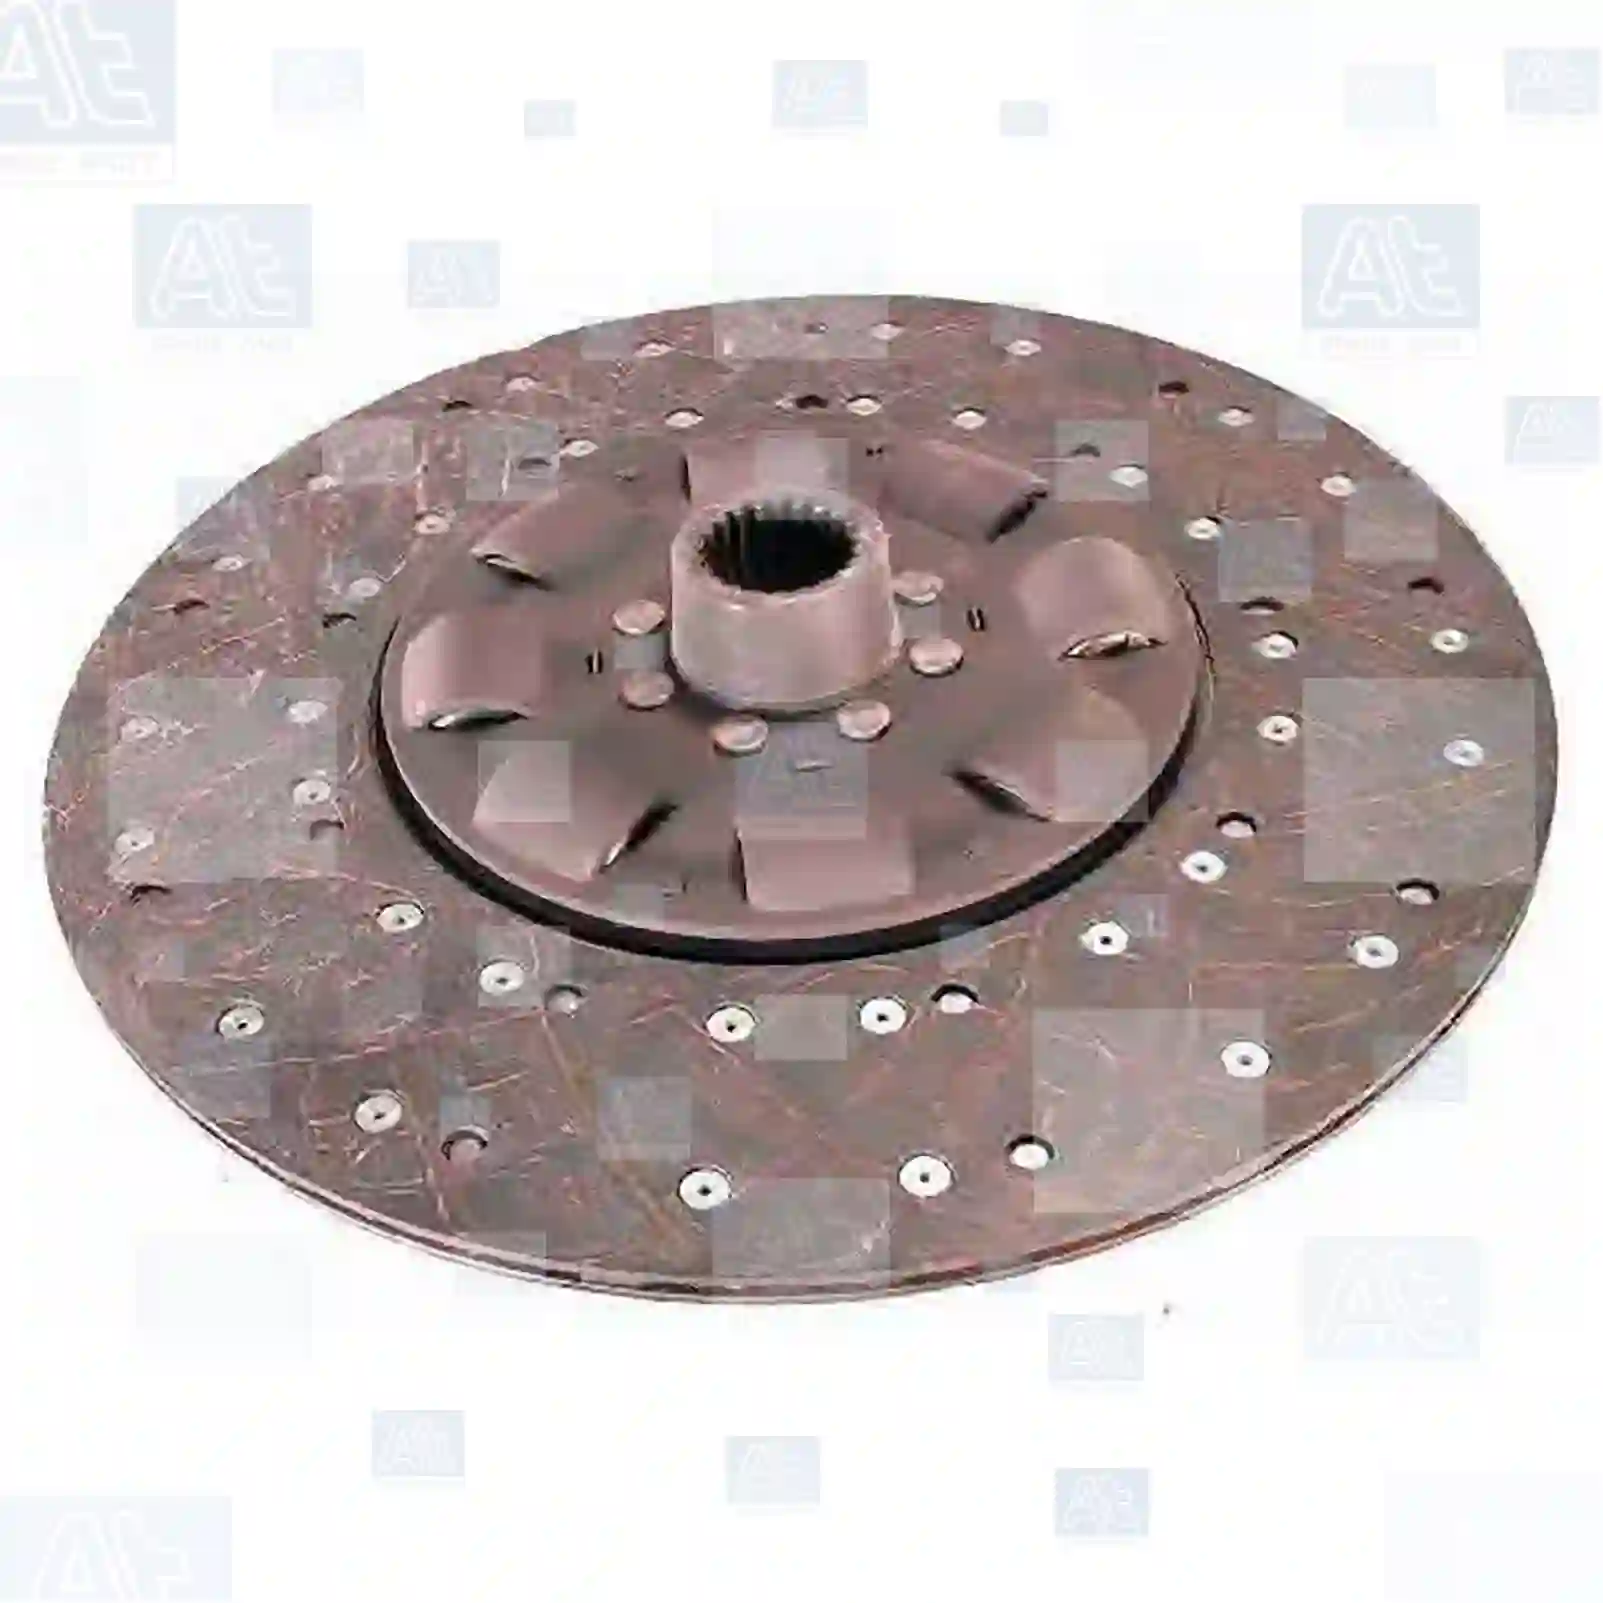 Clutch disc, 77722063, 1101588, 1304781, 1367172, 1387021, 364378, 369849, 571254, 571282, 571285, 571290, 10571254, 10571282, 10571285, 10571290, 1101588, 1102428, 1111150, 1304781, 1318603, 1360231, 1367172, 1387021, 1571254, 1571290, 1679549, 358352, 364378, 365135, 369849, 571254, 571282, 571285, 571290 ||  77722063 At Spare Part | Engine, Accelerator Pedal, Camshaft, Connecting Rod, Crankcase, Crankshaft, Cylinder Head, Engine Suspension Mountings, Exhaust Manifold, Exhaust Gas Recirculation, Filter Kits, Flywheel Housing, General Overhaul Kits, Engine, Intake Manifold, Oil Cleaner, Oil Cooler, Oil Filter, Oil Pump, Oil Sump, Piston & Liner, Sensor & Switch, Timing Case, Turbocharger, Cooling System, Belt Tensioner, Coolant Filter, Coolant Pipe, Corrosion Prevention Agent, Drive, Expansion Tank, Fan, Intercooler, Monitors & Gauges, Radiator, Thermostat, V-Belt / Timing belt, Water Pump, Fuel System, Electronical Injector Unit, Feed Pump, Fuel Filter, cpl., Fuel Gauge Sender,  Fuel Line, Fuel Pump, Fuel Tank, Injection Line Kit, Injection Pump, Exhaust System, Clutch & Pedal, Gearbox, Propeller Shaft, Axles, Brake System, Hubs & Wheels, Suspension, Leaf Spring, Universal Parts / Accessories, Steering, Electrical System, Cabin Clutch disc, 77722063, 1101588, 1304781, 1367172, 1387021, 364378, 369849, 571254, 571282, 571285, 571290, 10571254, 10571282, 10571285, 10571290, 1101588, 1102428, 1111150, 1304781, 1318603, 1360231, 1367172, 1387021, 1571254, 1571290, 1679549, 358352, 364378, 365135, 369849, 571254, 571282, 571285, 571290 ||  77722063 At Spare Part | Engine, Accelerator Pedal, Camshaft, Connecting Rod, Crankcase, Crankshaft, Cylinder Head, Engine Suspension Mountings, Exhaust Manifold, Exhaust Gas Recirculation, Filter Kits, Flywheel Housing, General Overhaul Kits, Engine, Intake Manifold, Oil Cleaner, Oil Cooler, Oil Filter, Oil Pump, Oil Sump, Piston & Liner, Sensor & Switch, Timing Case, Turbocharger, Cooling System, Belt Tensioner, Coolant Filter, Coolant Pipe, Corrosion Prevention Agent, Drive, Expansion Tank, Fan, Intercooler, Monitors & Gauges, Radiator, Thermostat, V-Belt / Timing belt, Water Pump, Fuel System, Electronical Injector Unit, Feed Pump, Fuel Filter, cpl., Fuel Gauge Sender,  Fuel Line, Fuel Pump, Fuel Tank, Injection Line Kit, Injection Pump, Exhaust System, Clutch & Pedal, Gearbox, Propeller Shaft, Axles, Brake System, Hubs & Wheels, Suspension, Leaf Spring, Universal Parts / Accessories, Steering, Electrical System, Cabin